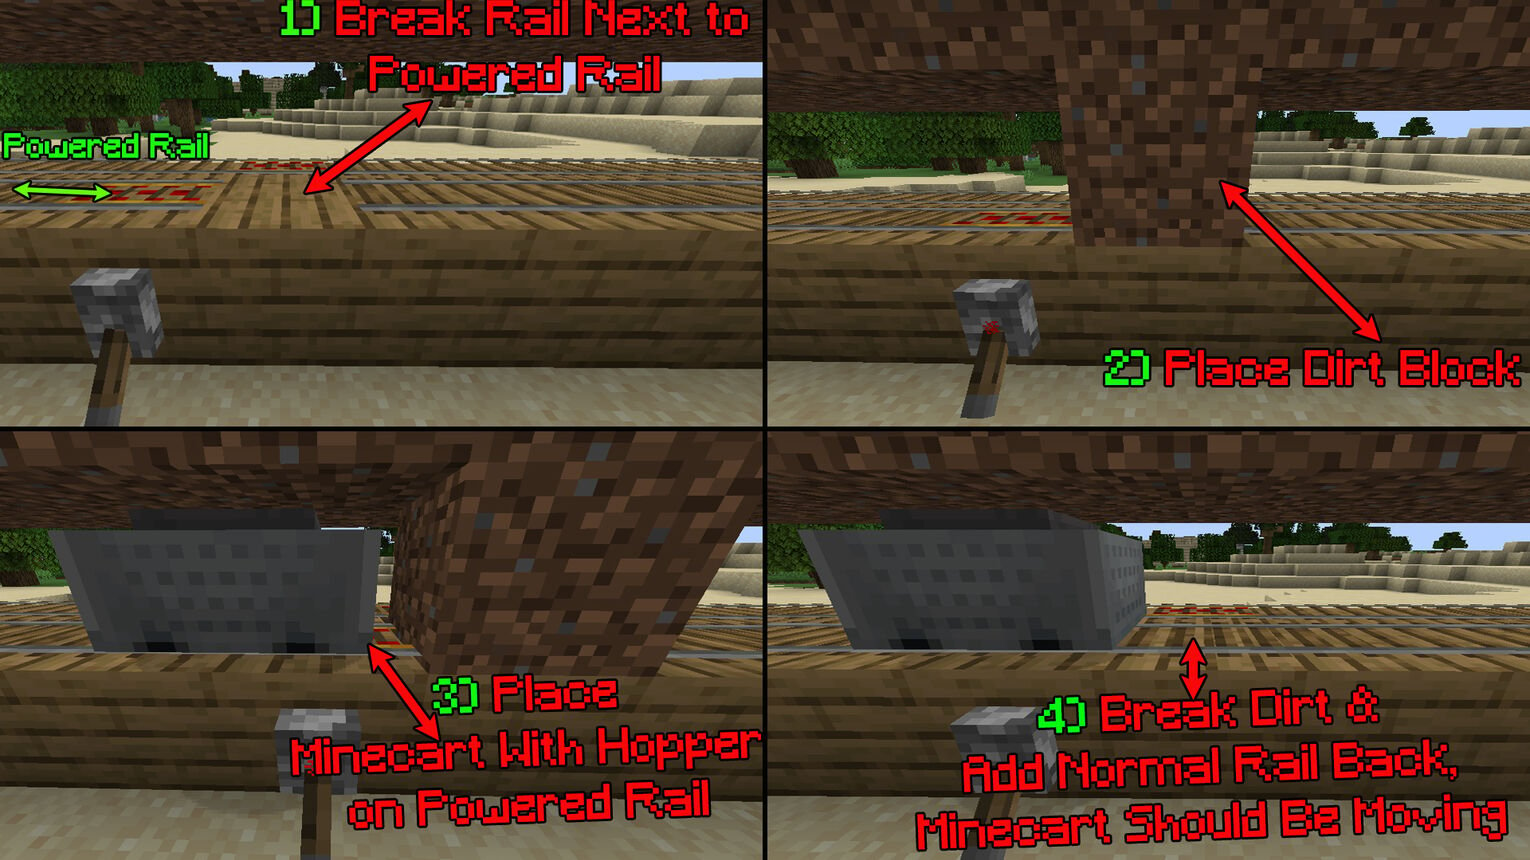 Minecraft Bamboo Farm Moving Minecart with Hopper Placement